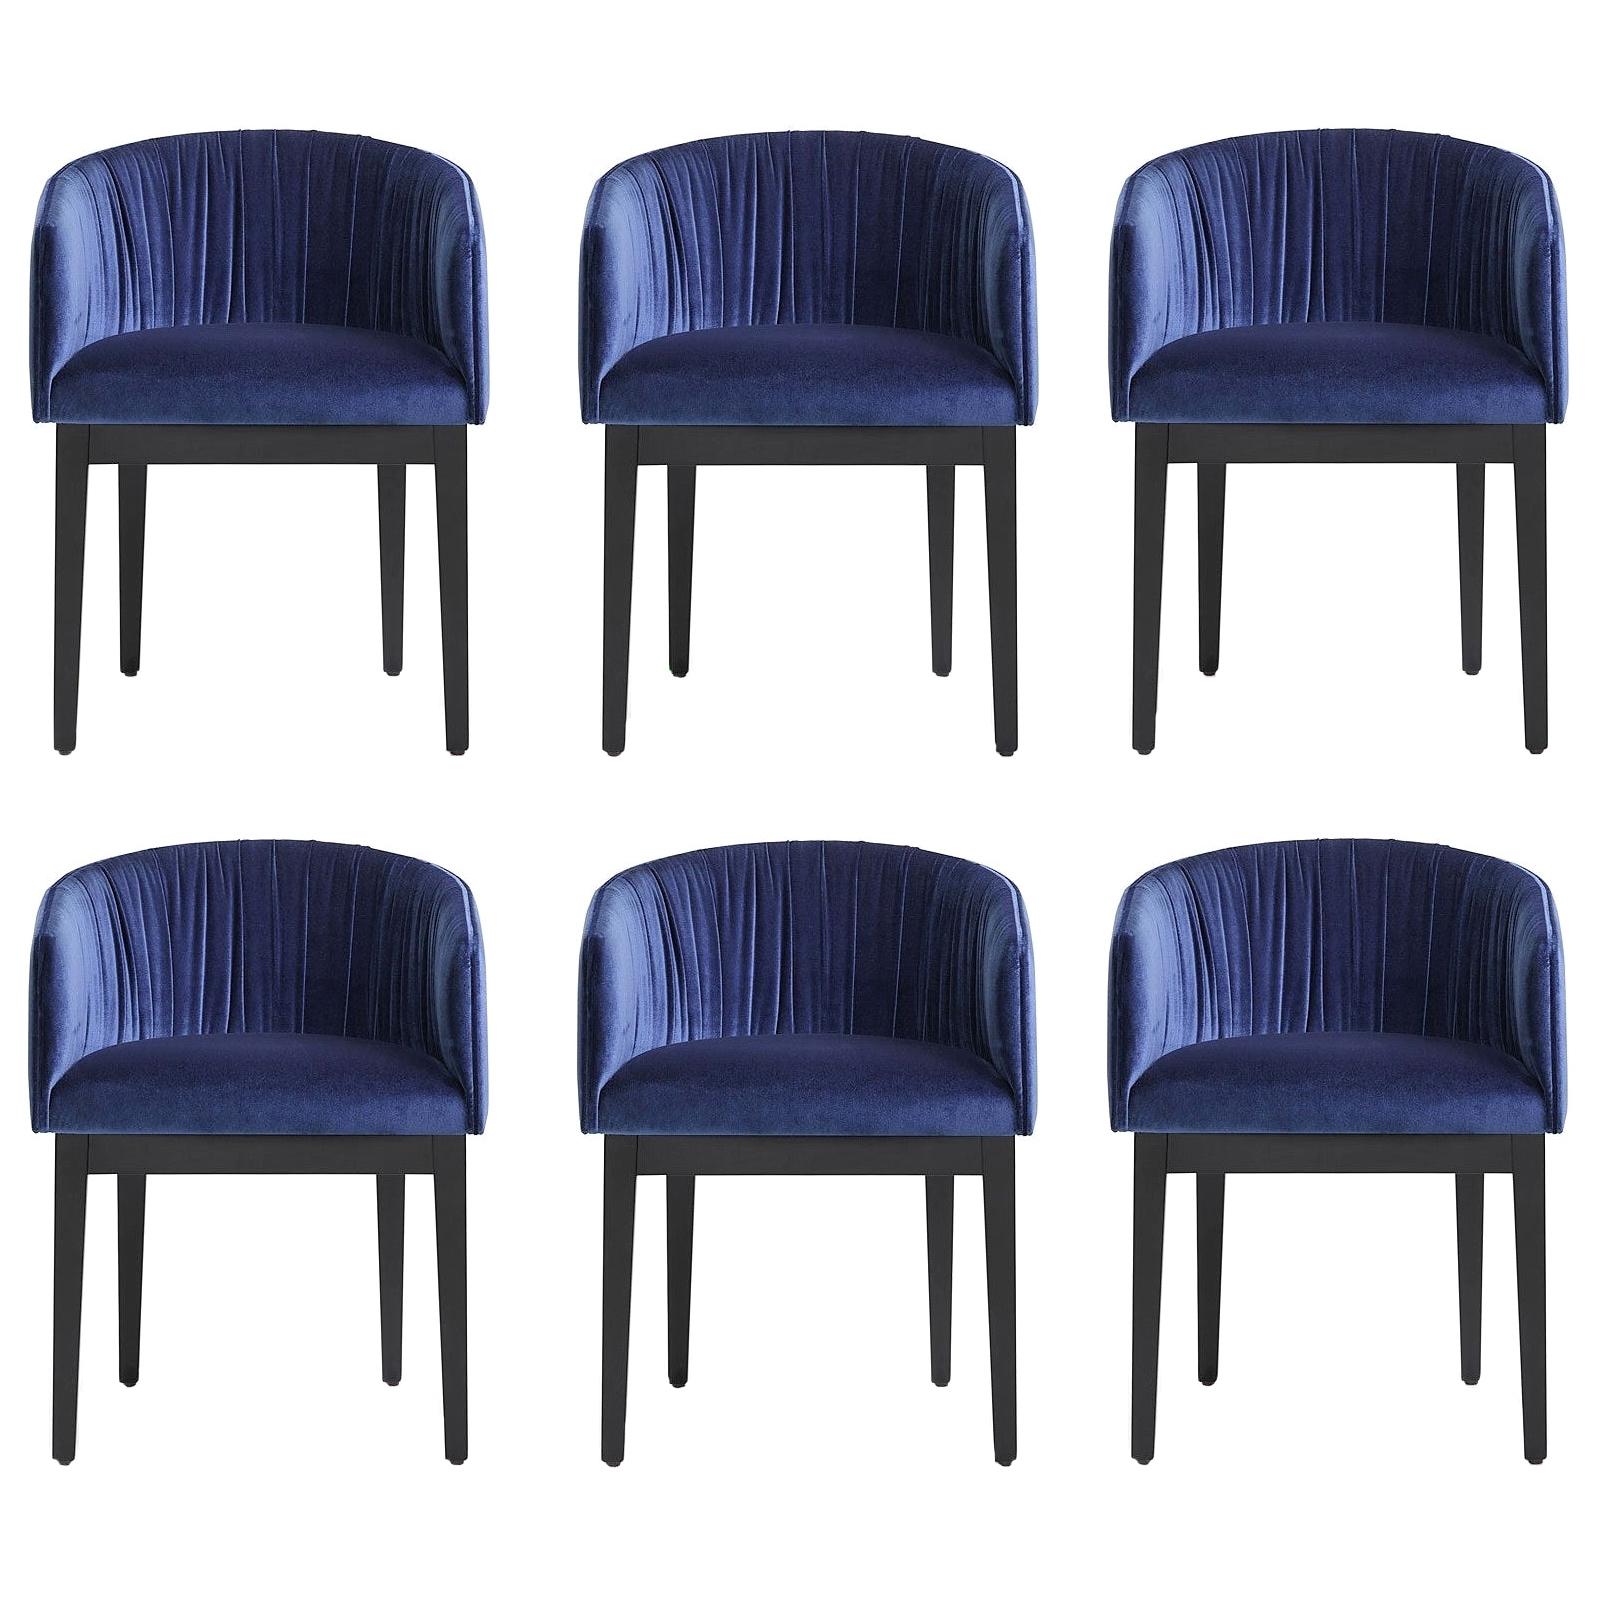 Contemporary Elegant Dining Chairs Crafted in Italy